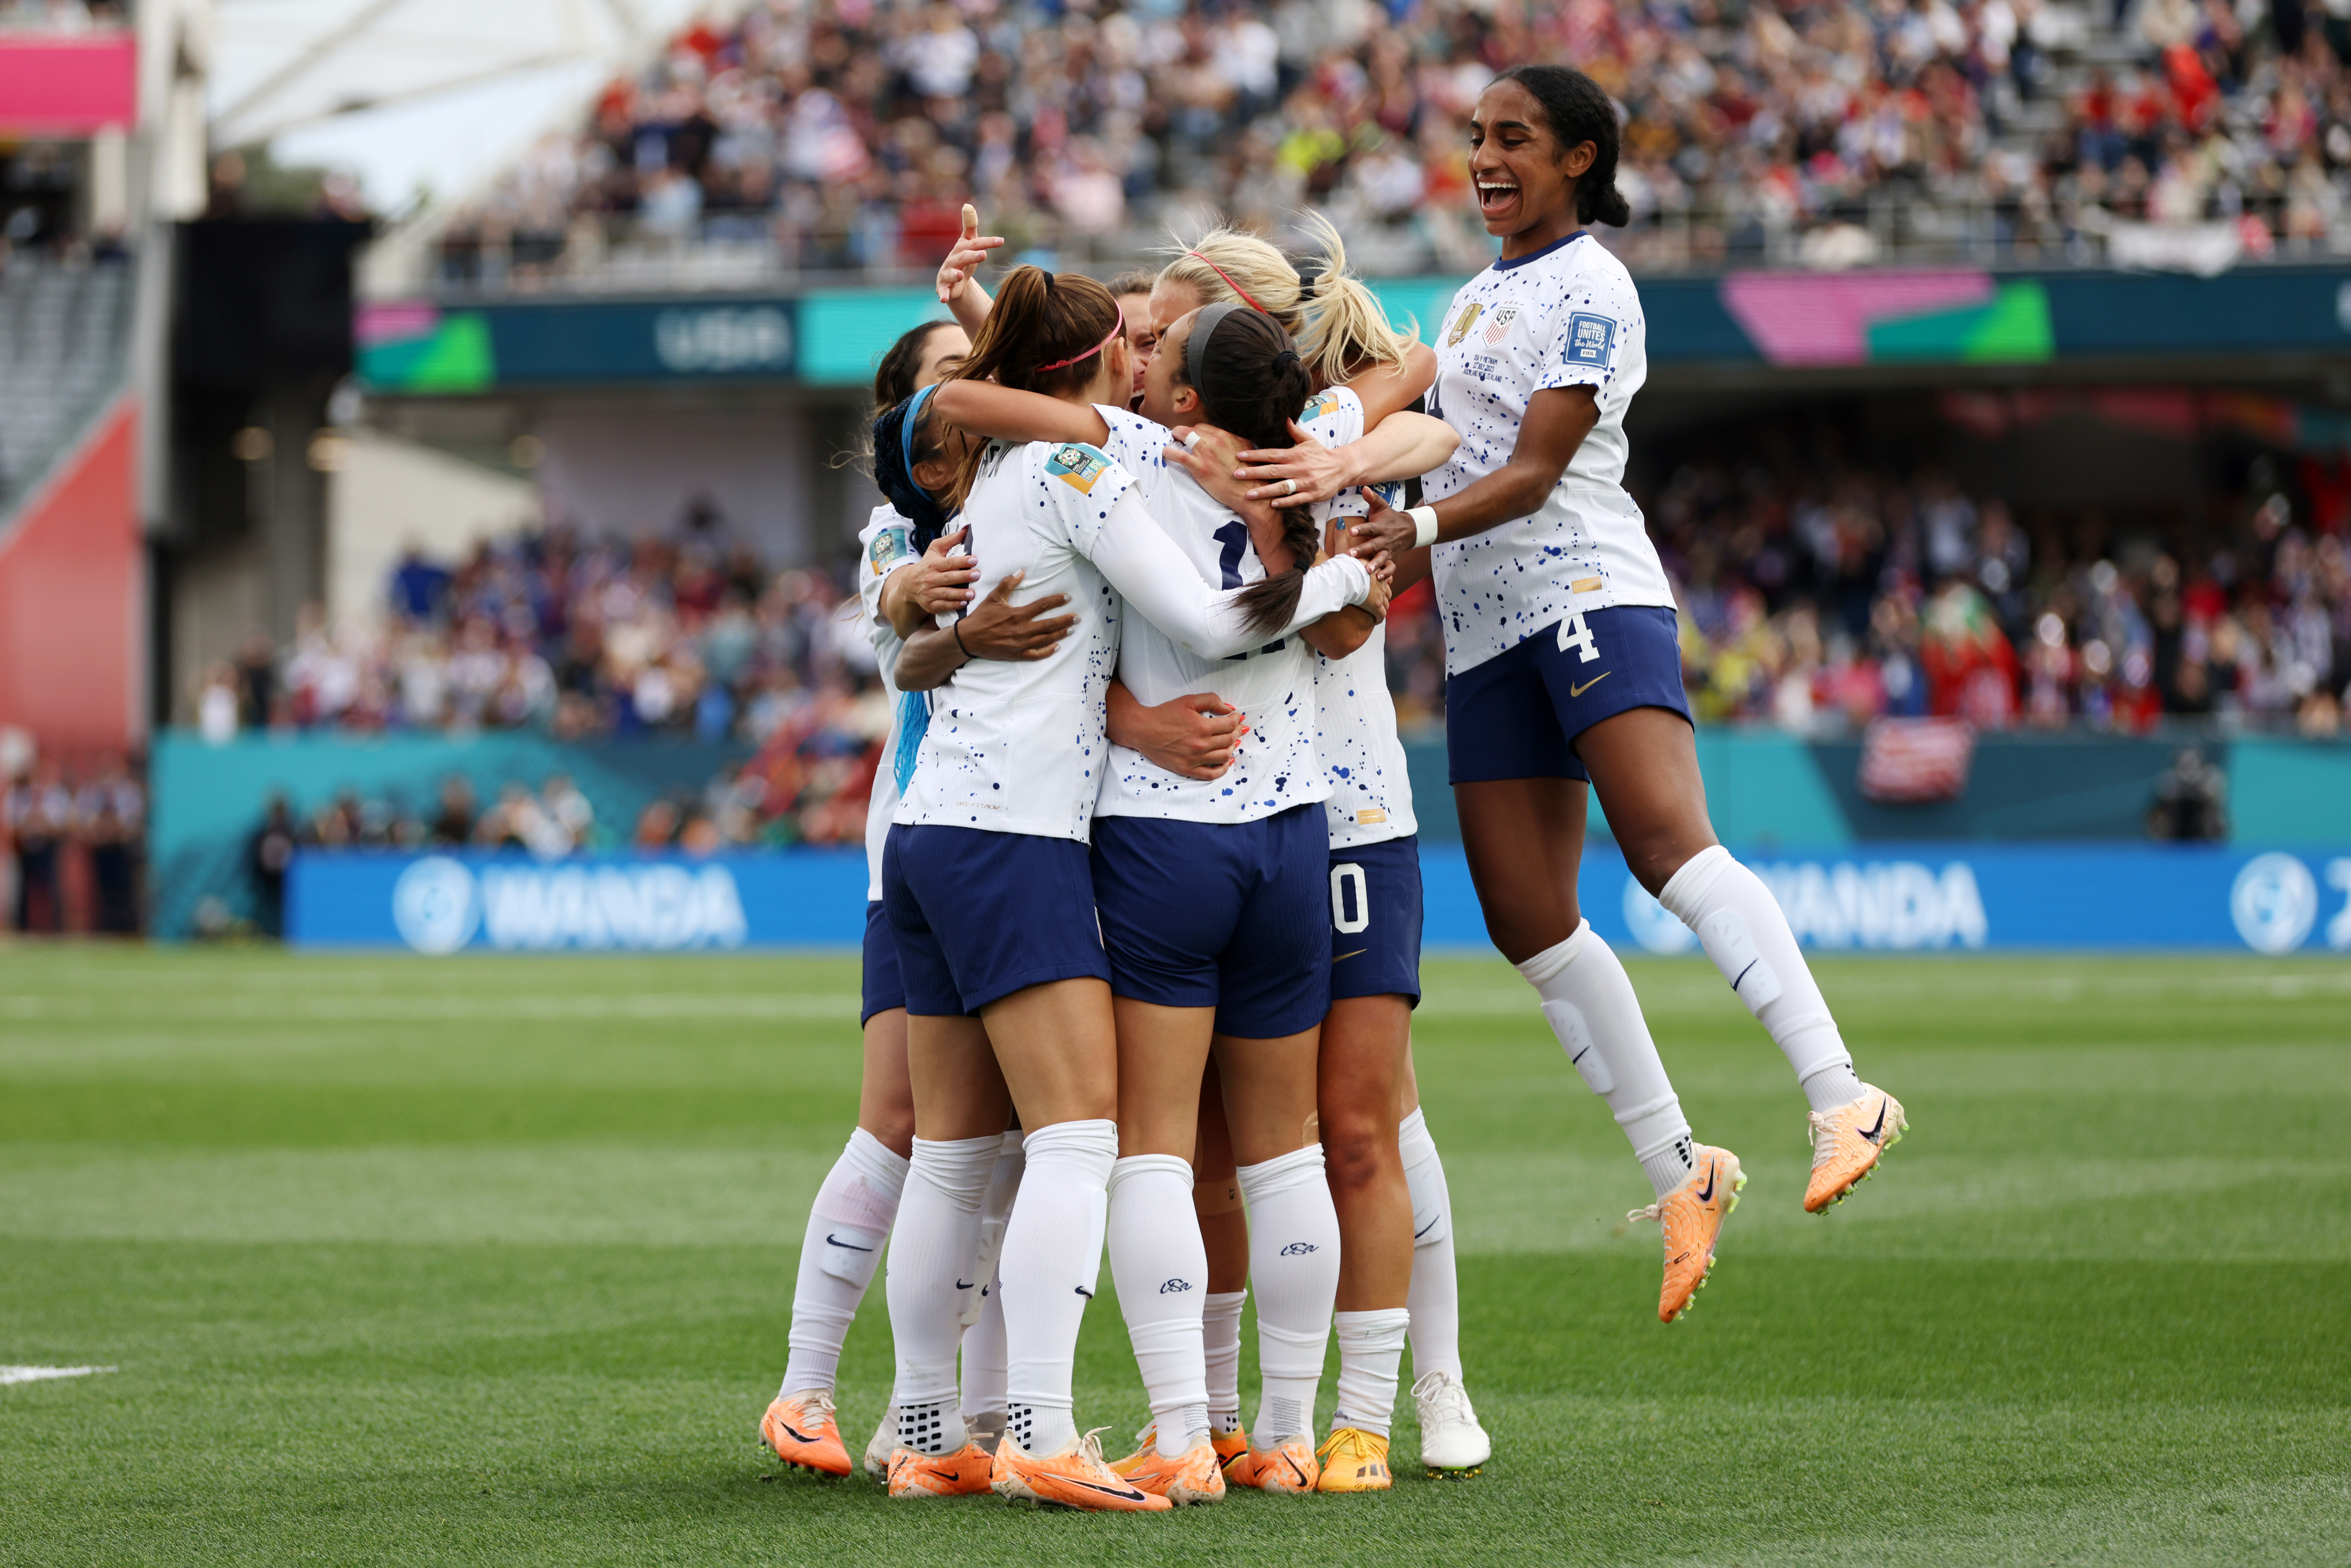 I hate US sports. The women's football team is making it more